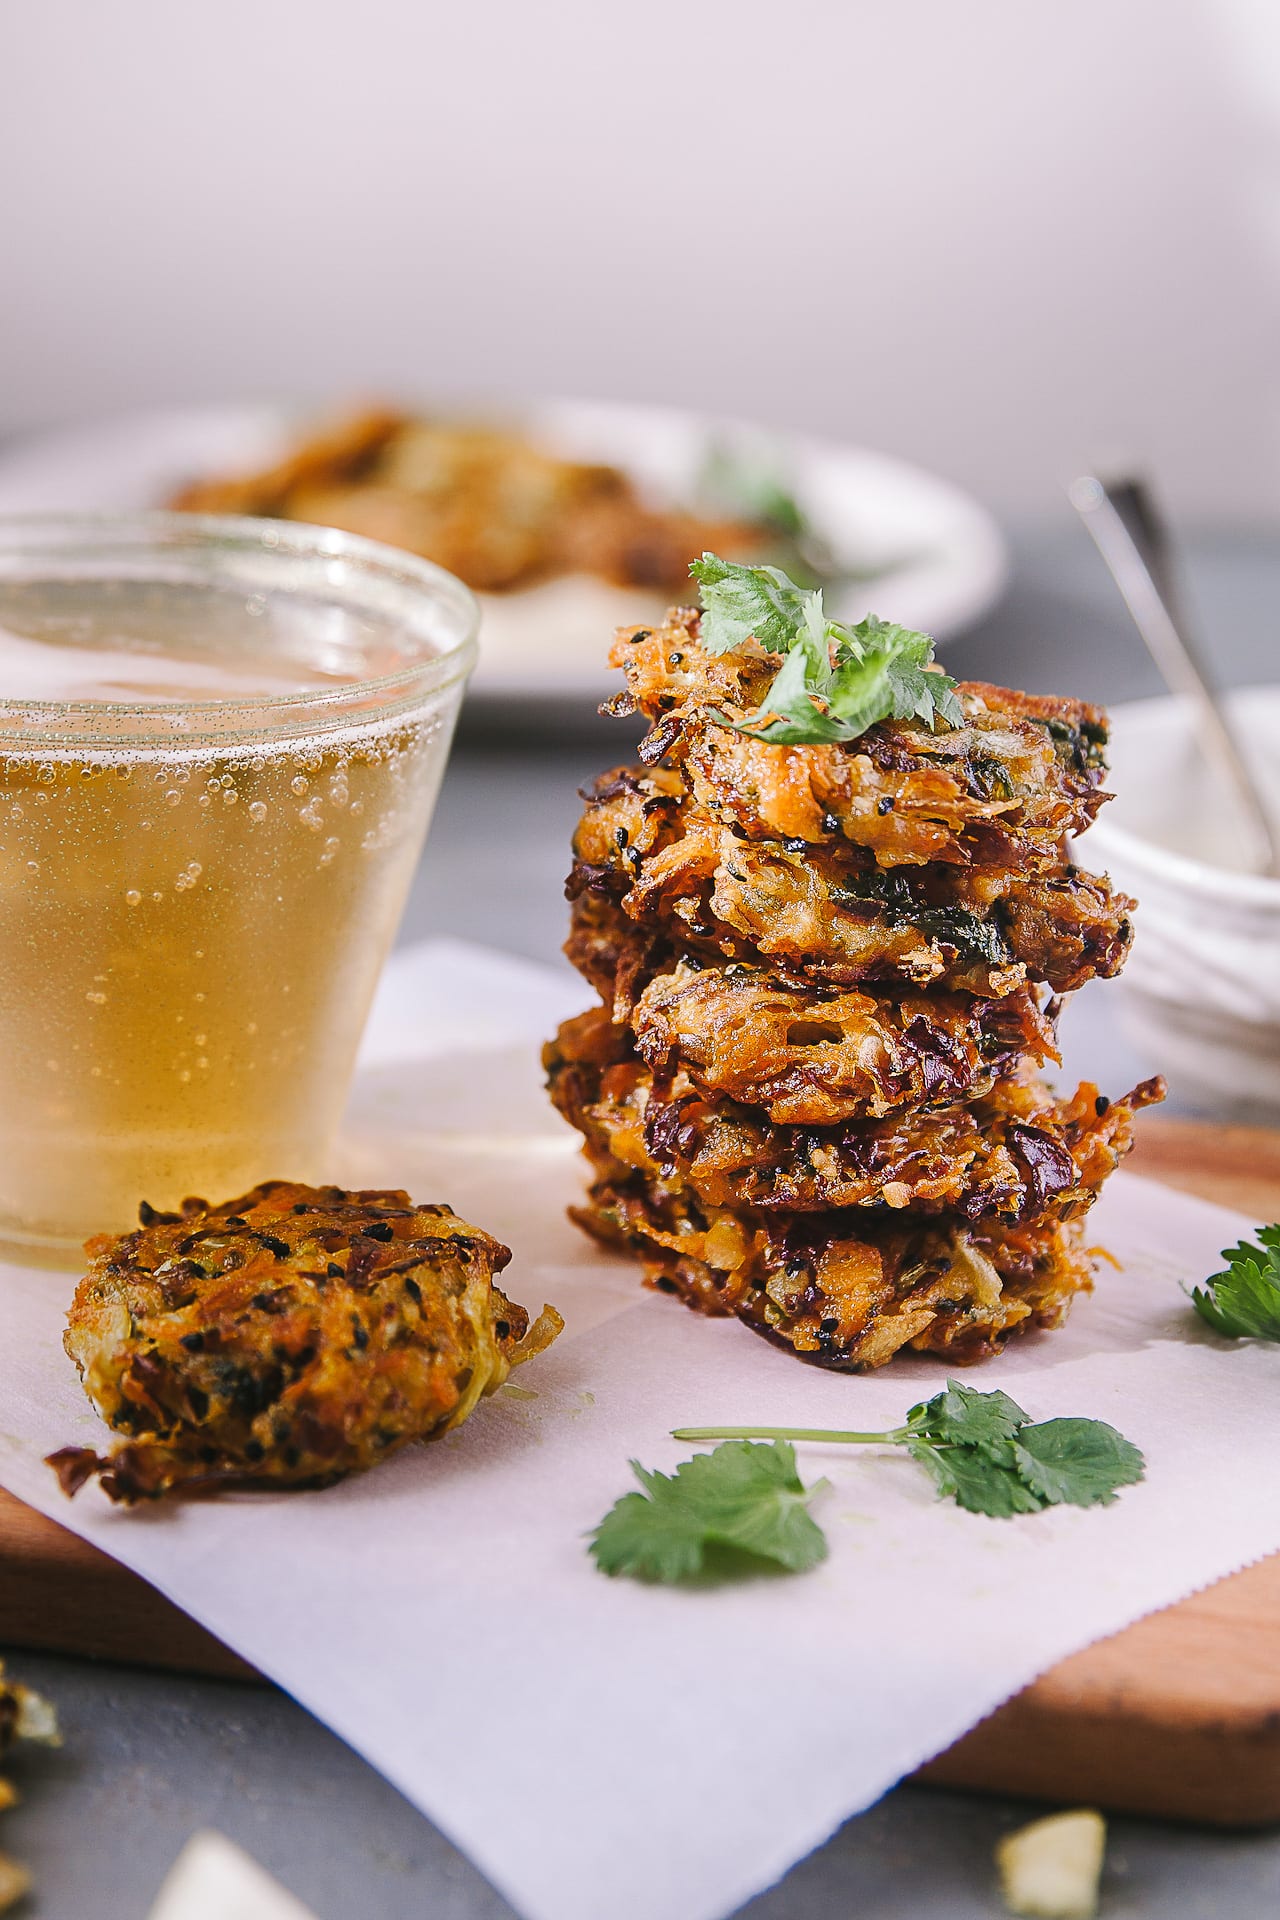 EASY with NO EGGS Crispy Cabbage and Carrot Fritters is a perfect snack for any day! #cabbage #carrot #fritters #foodphotography #vegetarian